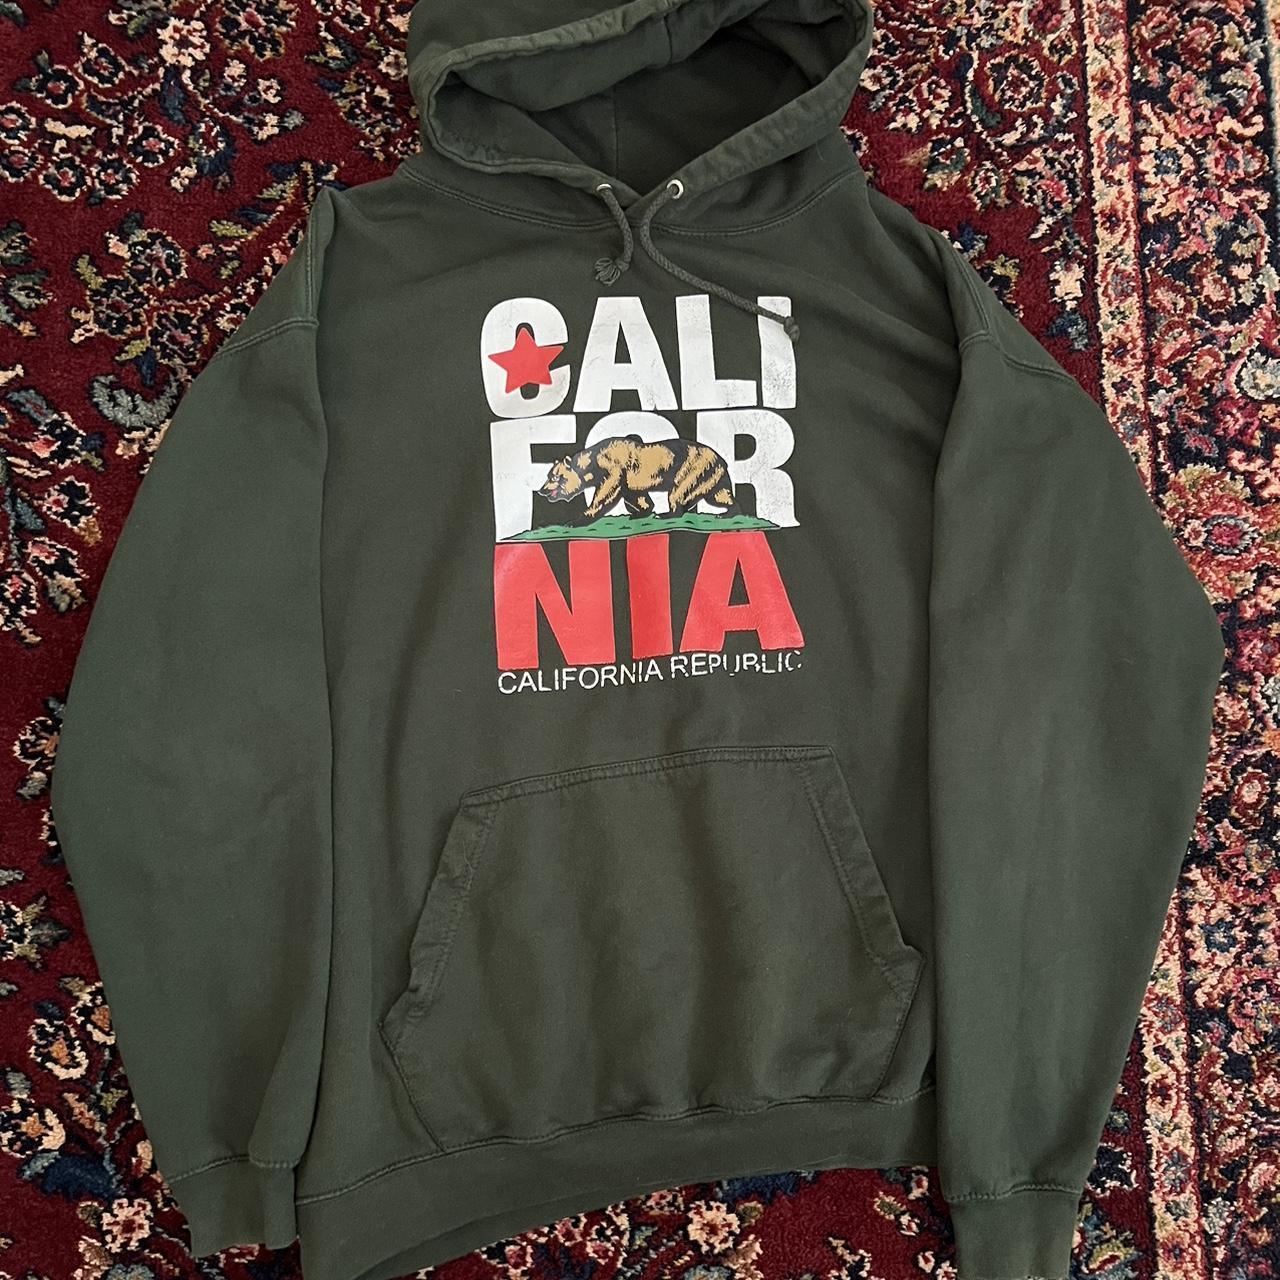 Cali hoodie some of the label is starting to peel - Depop